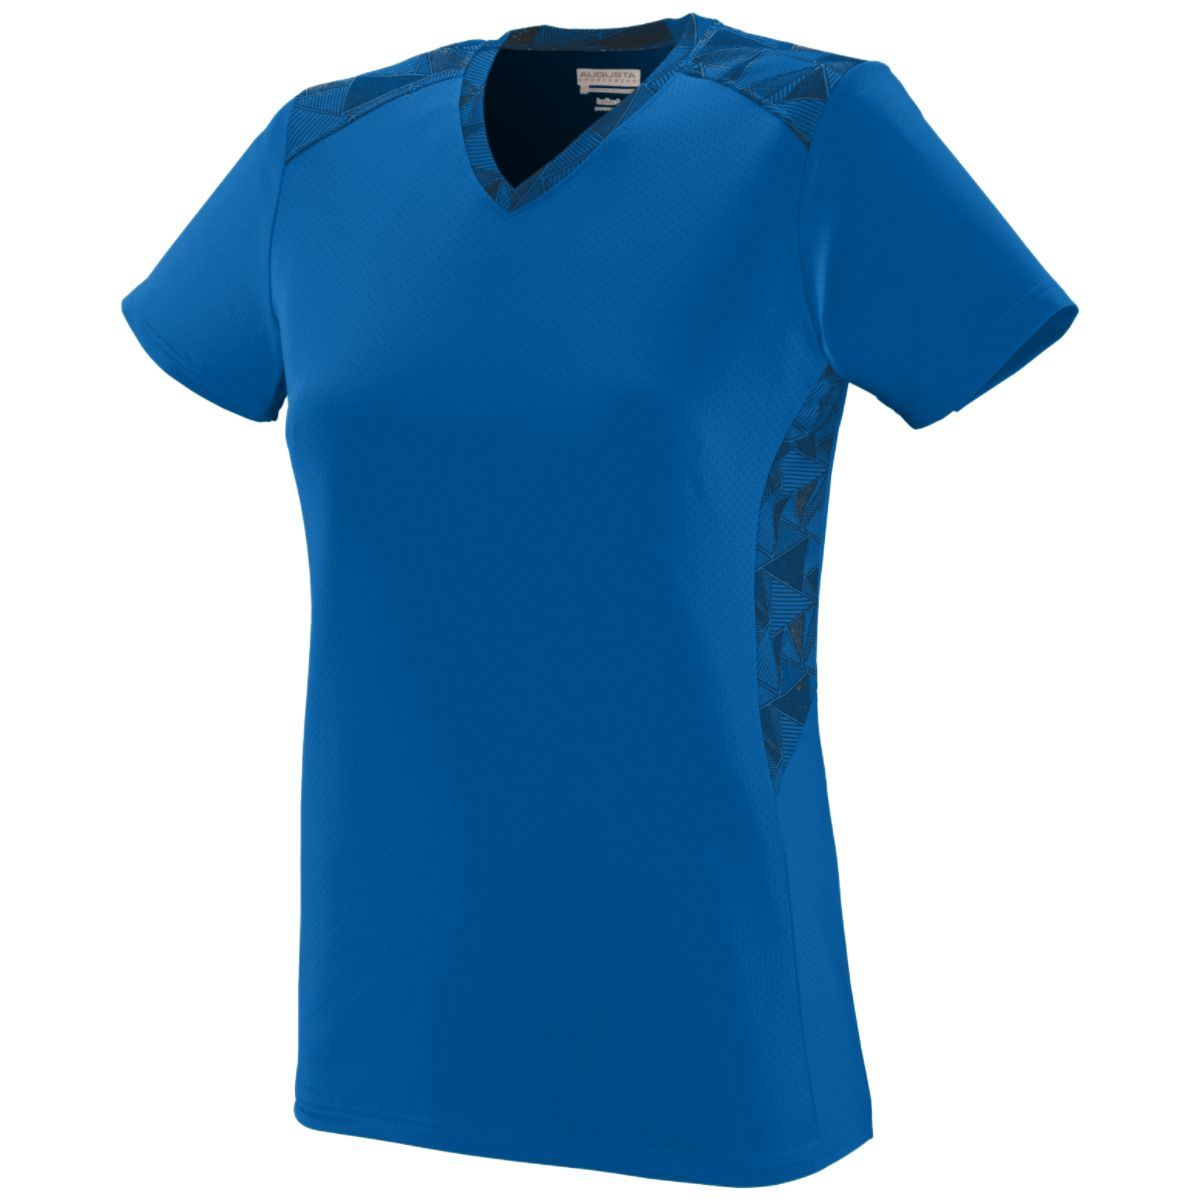 Augusta Sportswear Ladies Vigorous Jersey in Royal/Royal/Black Print  -Part of the Ladies, Ladies-Jersey, Augusta-Products, Softball, Shirts product lines at KanaleyCreations.com